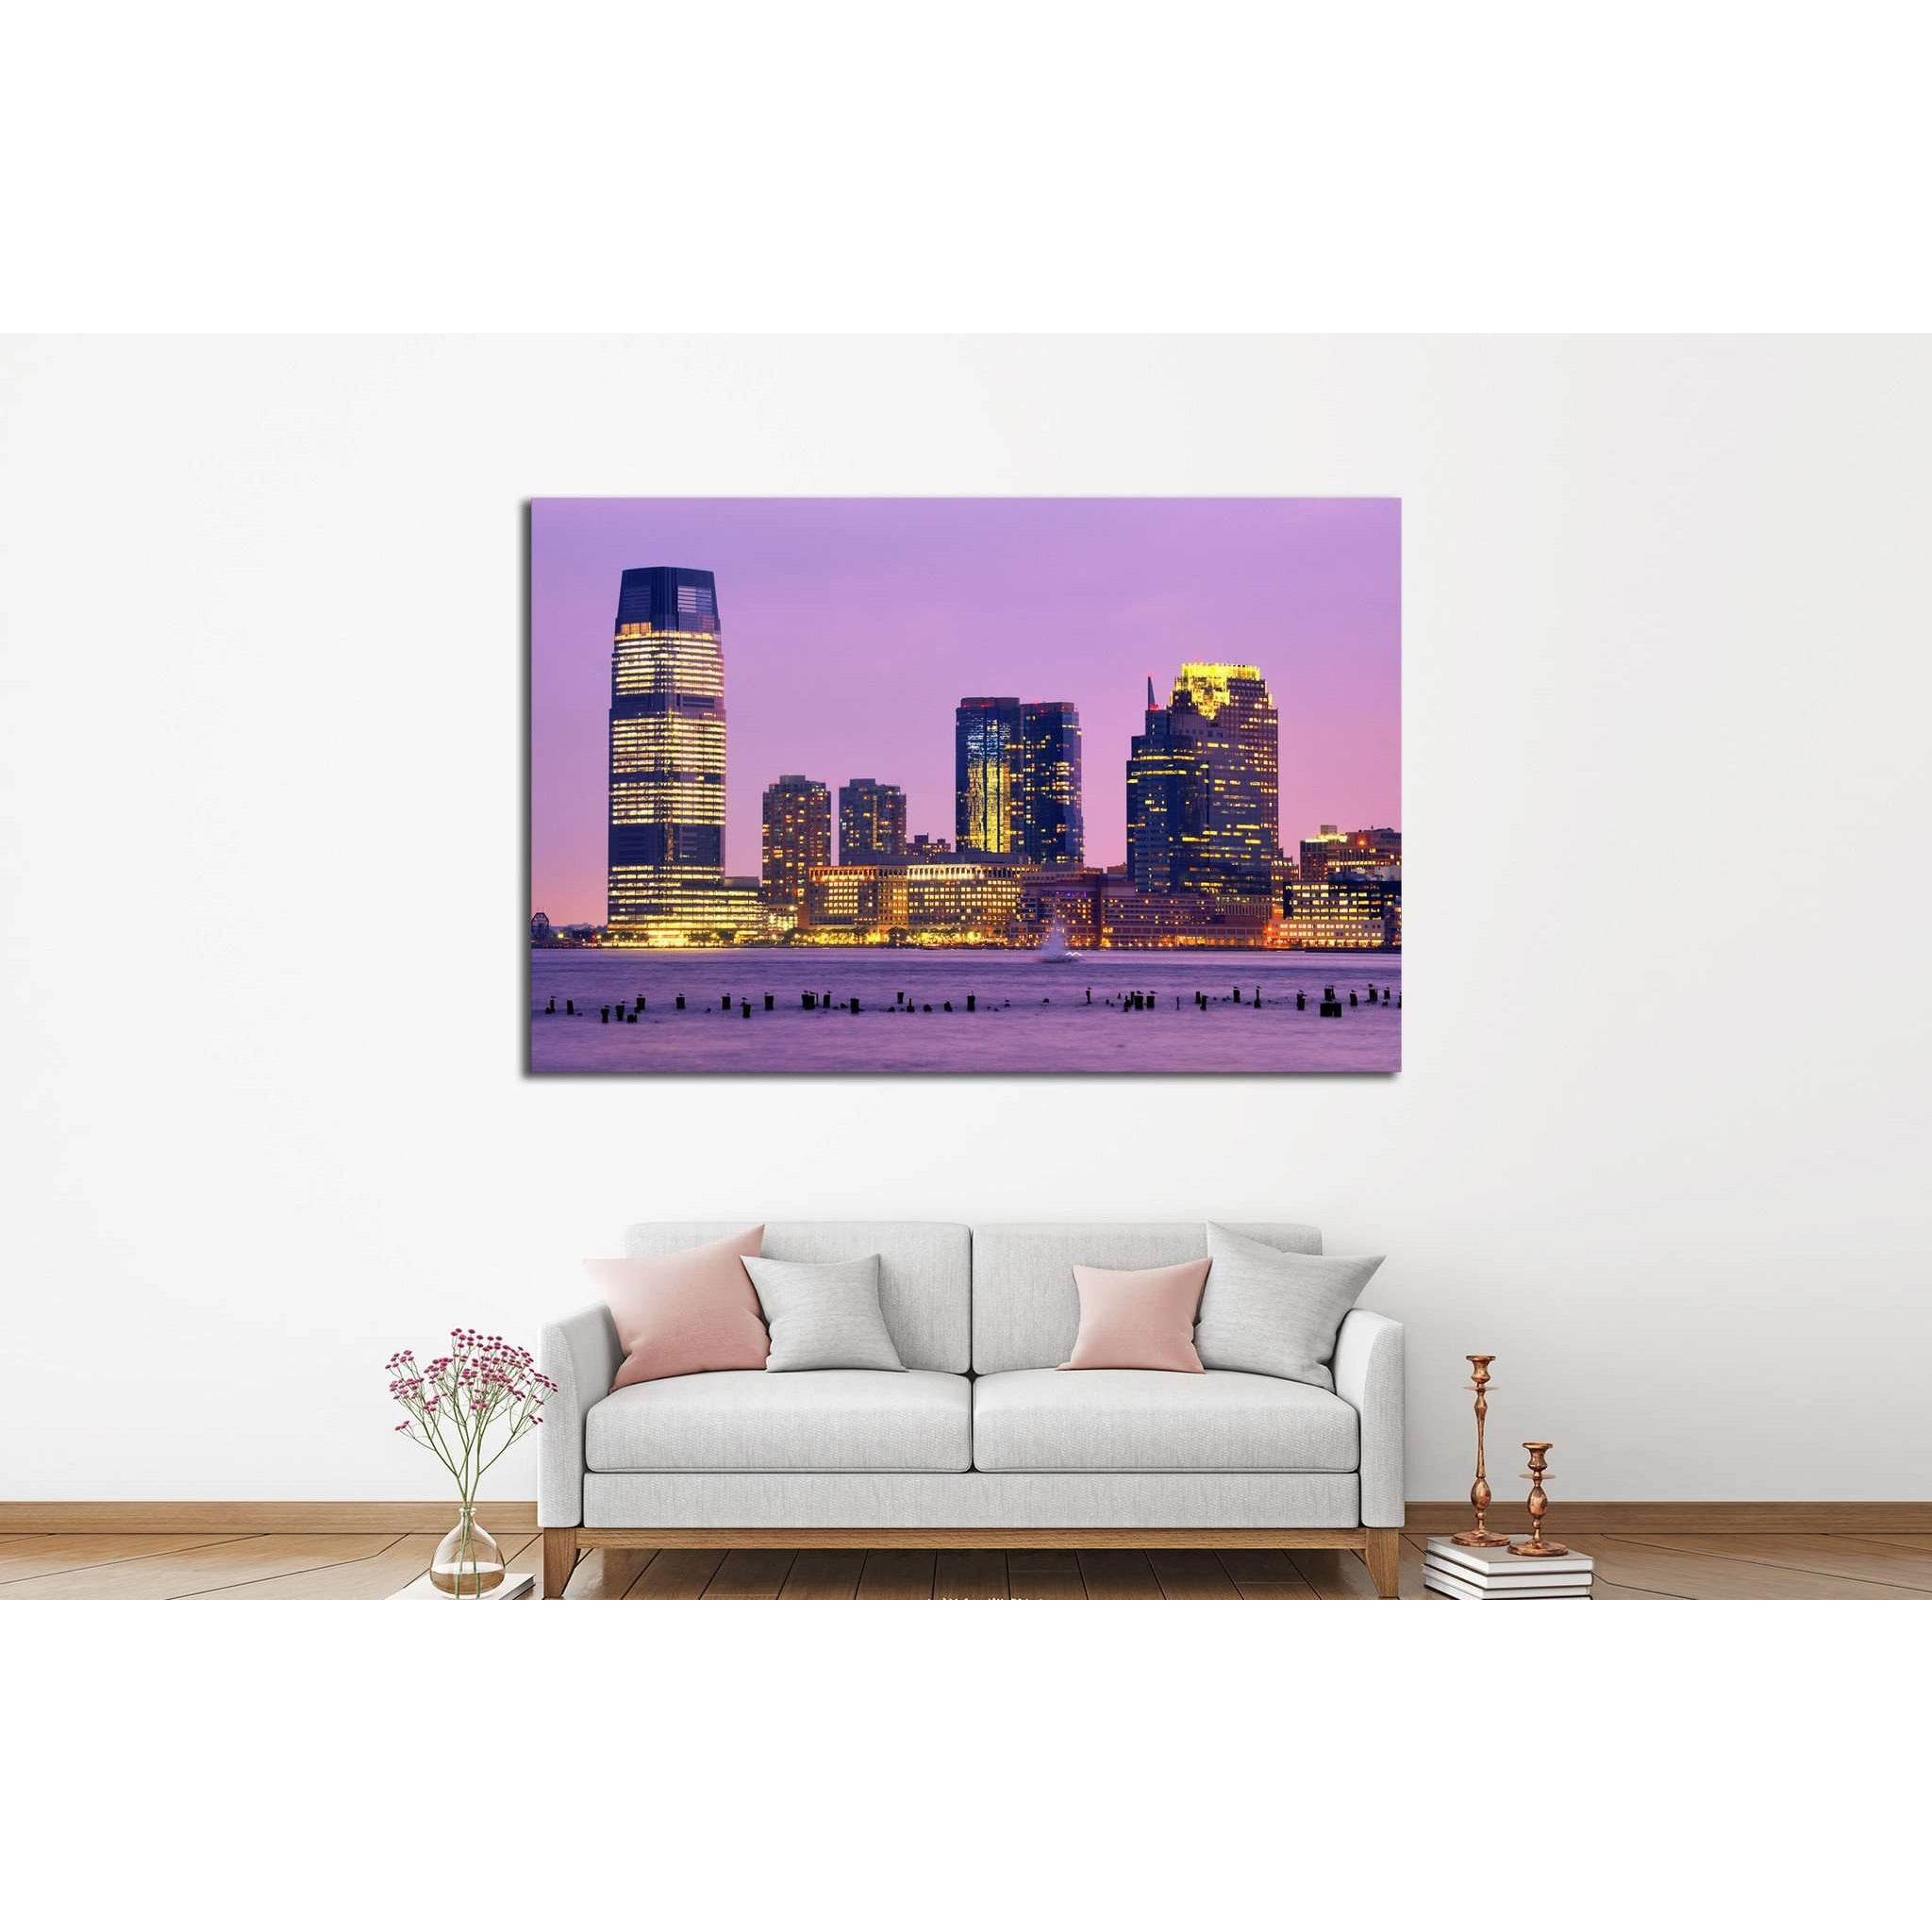 Skyscrapers at Exchange Place in Jersey City, New Jersey №1668 Ready to Hang Canvas Print